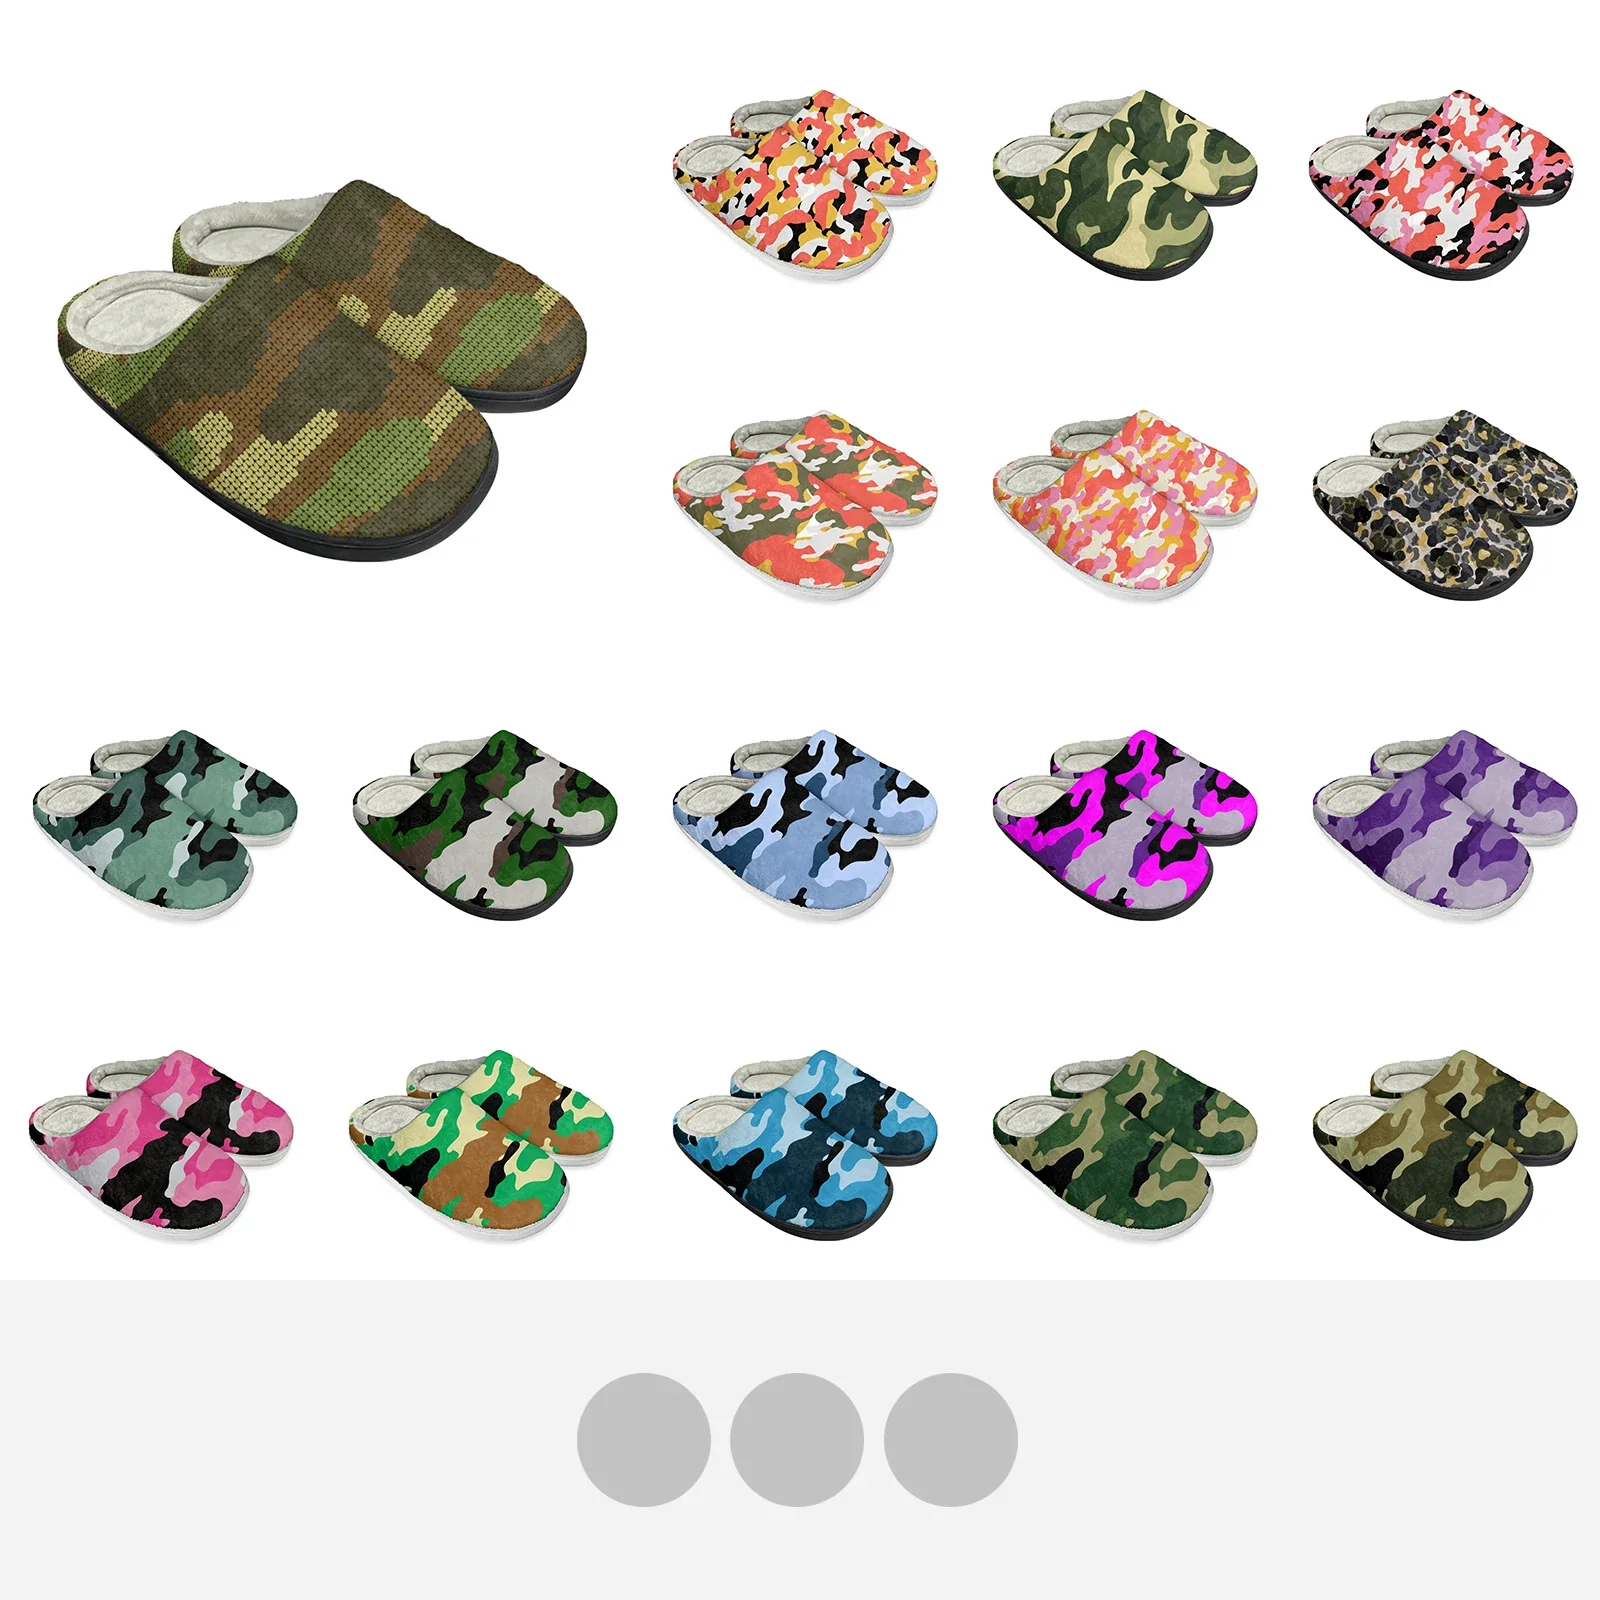 

New Style Household Green Camouflage Cotton Slippers Comfortable Flannel Upper Non-Slip TPR Sole Fit Give Spouse Holiday Gift